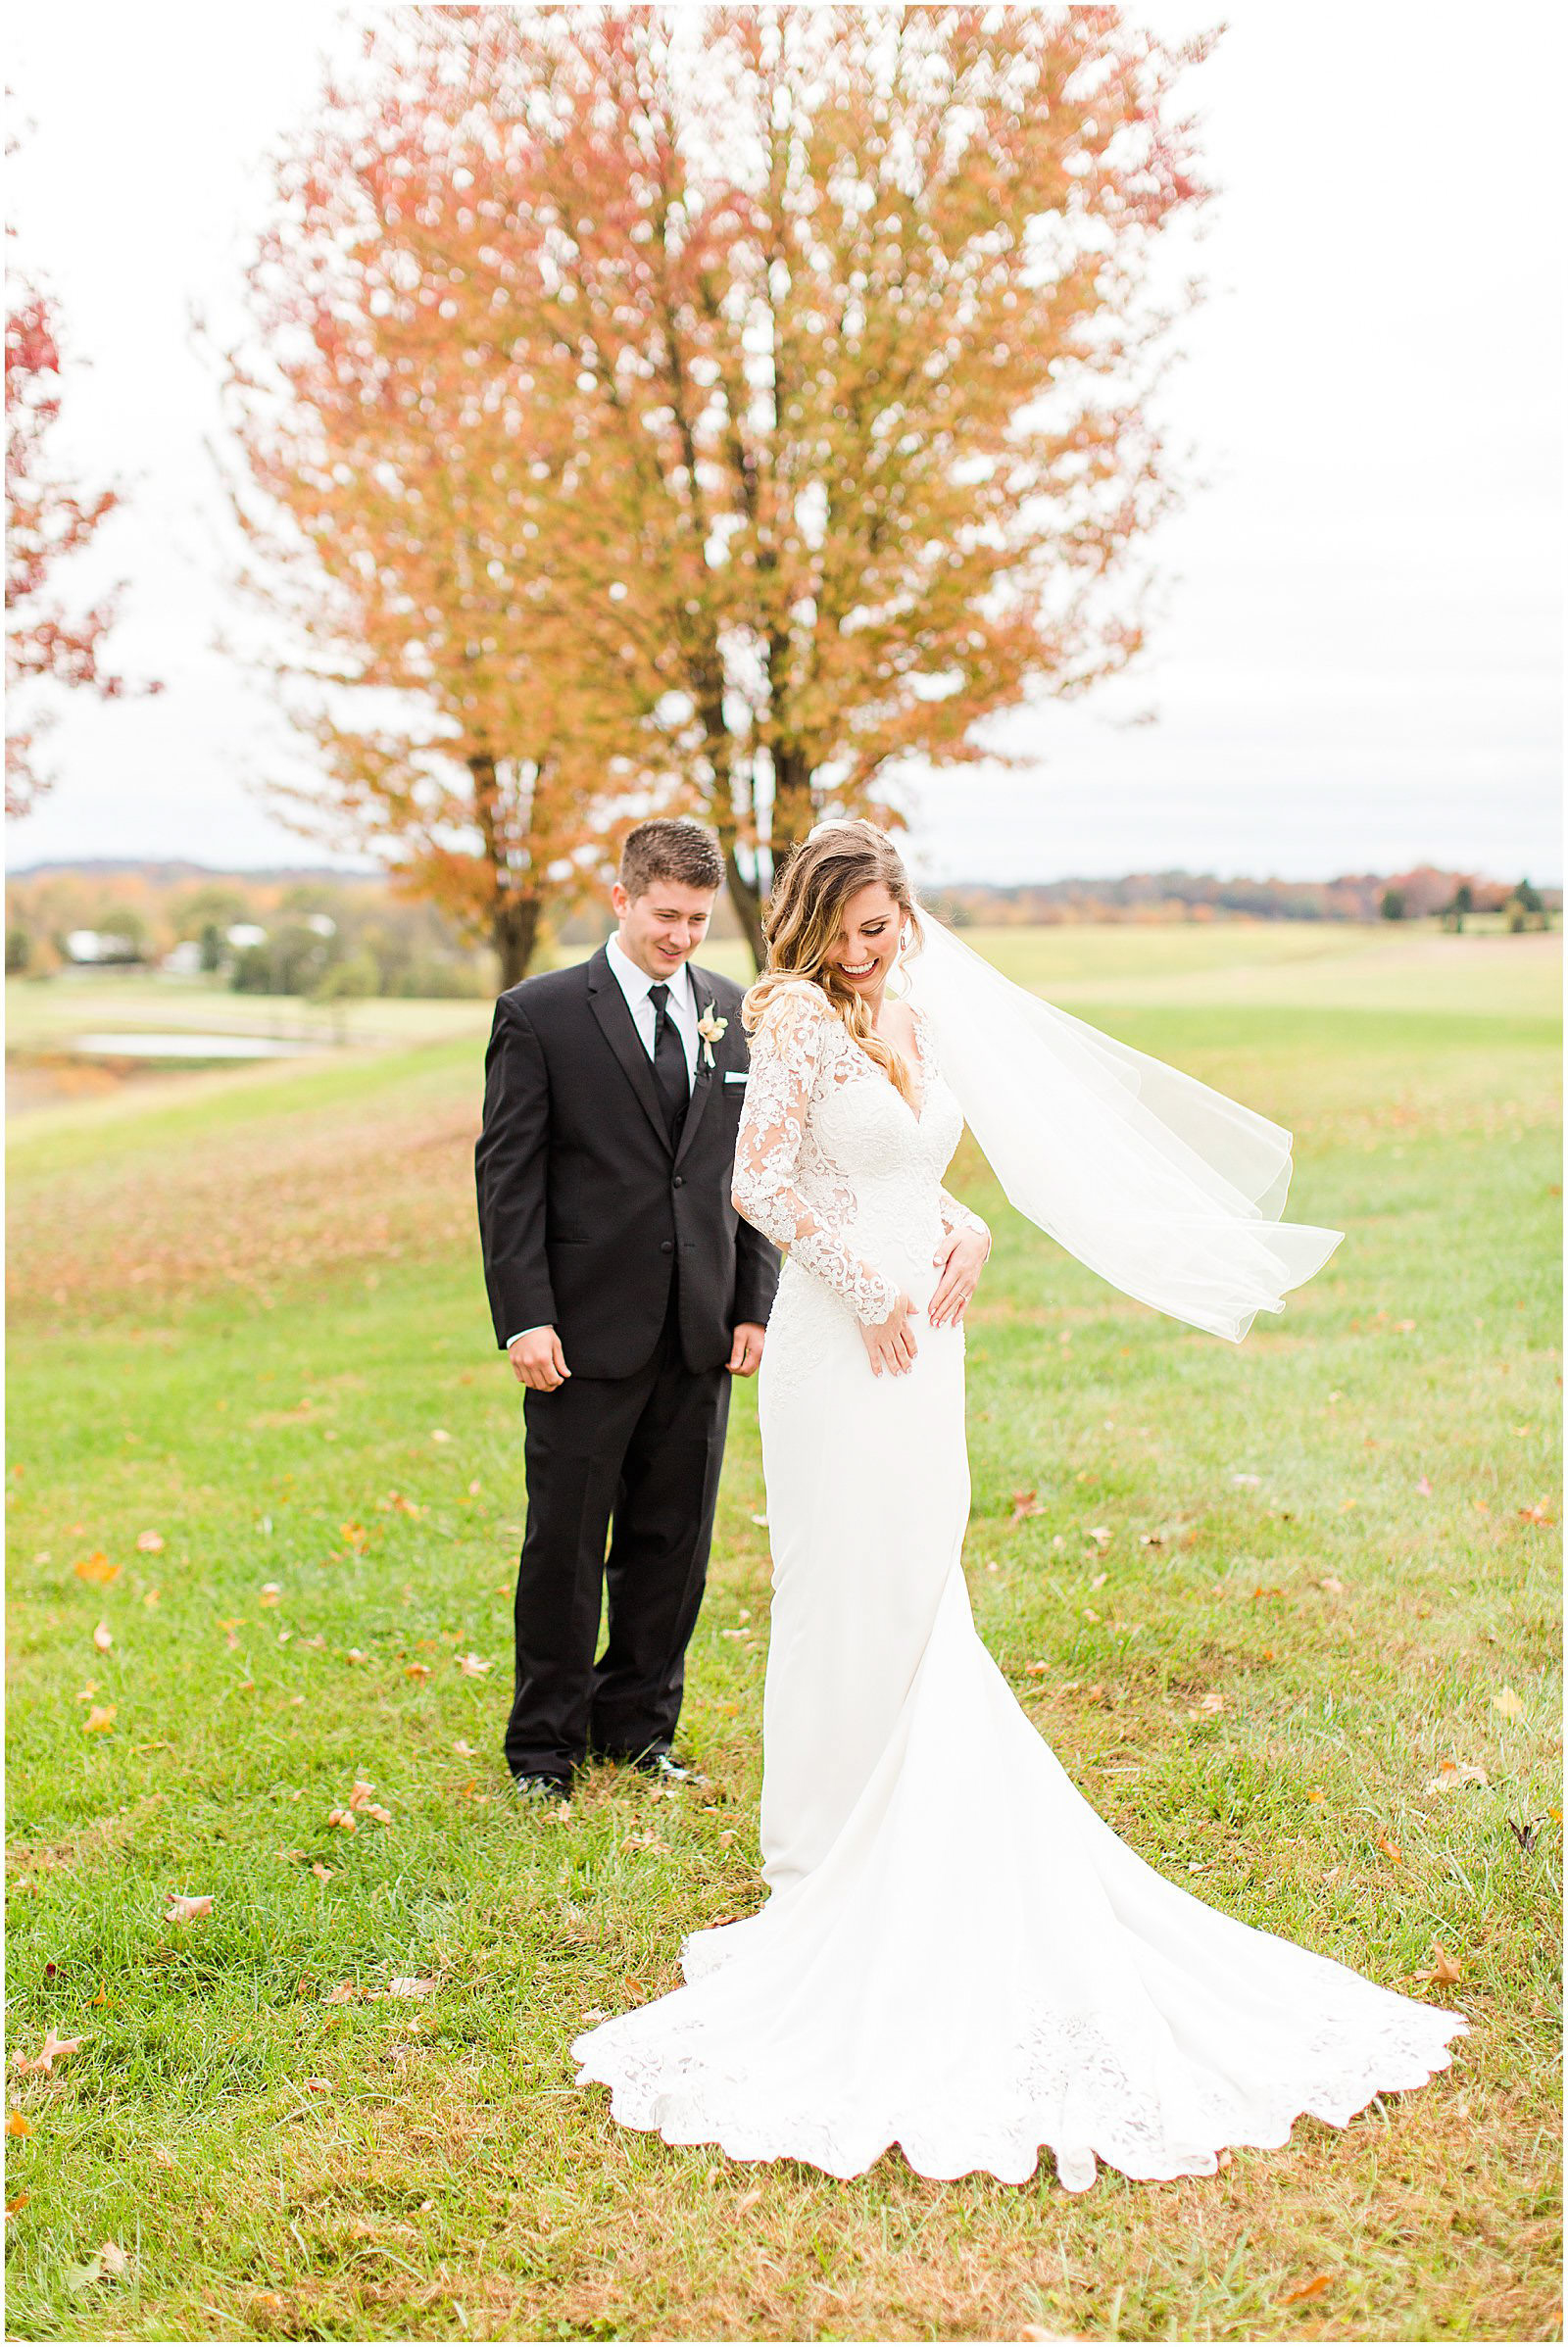 A Romantic Fall Wedding in Ferdinand, IN | Tori and Kyle | Bret and Brandie Photography 0053.jpg